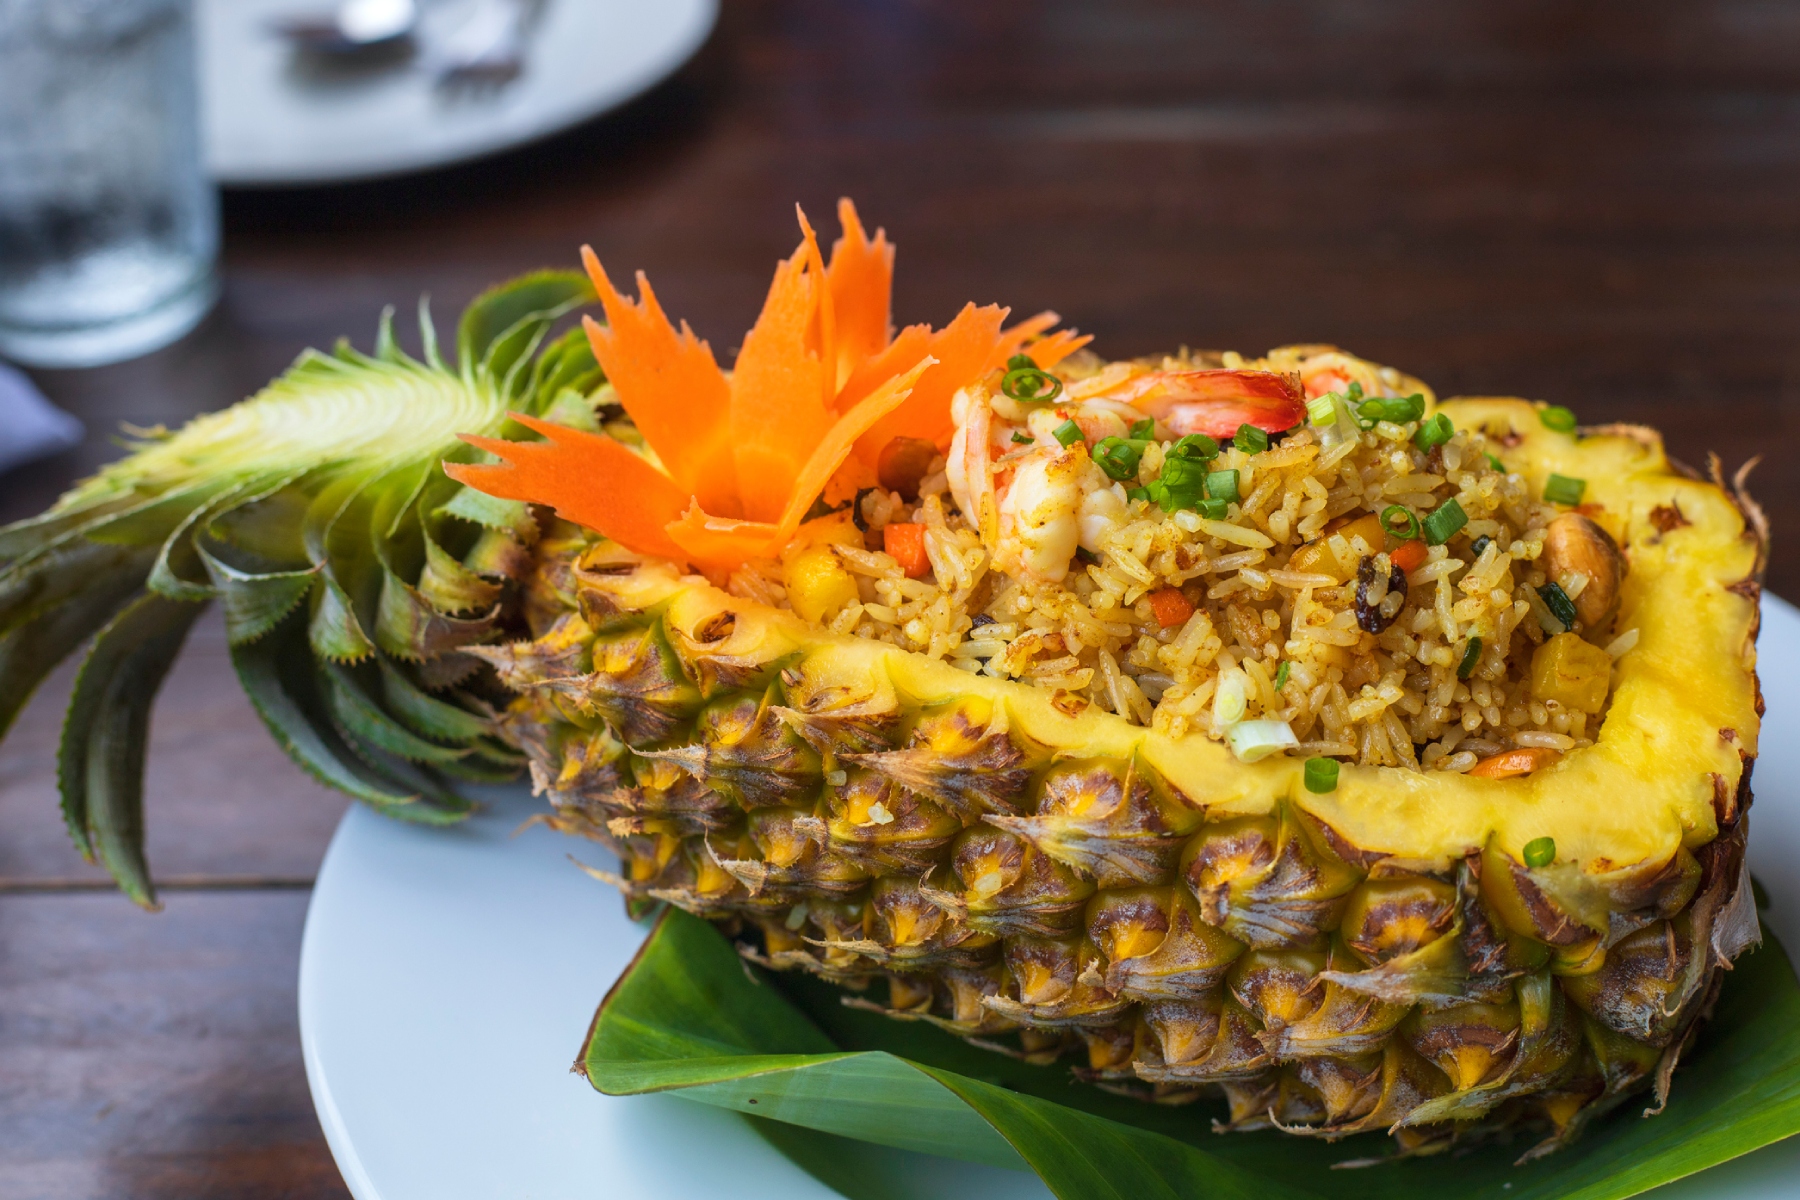 Khao pad sapparod on a plate on a table, consisting of half a hollowed out pineapple